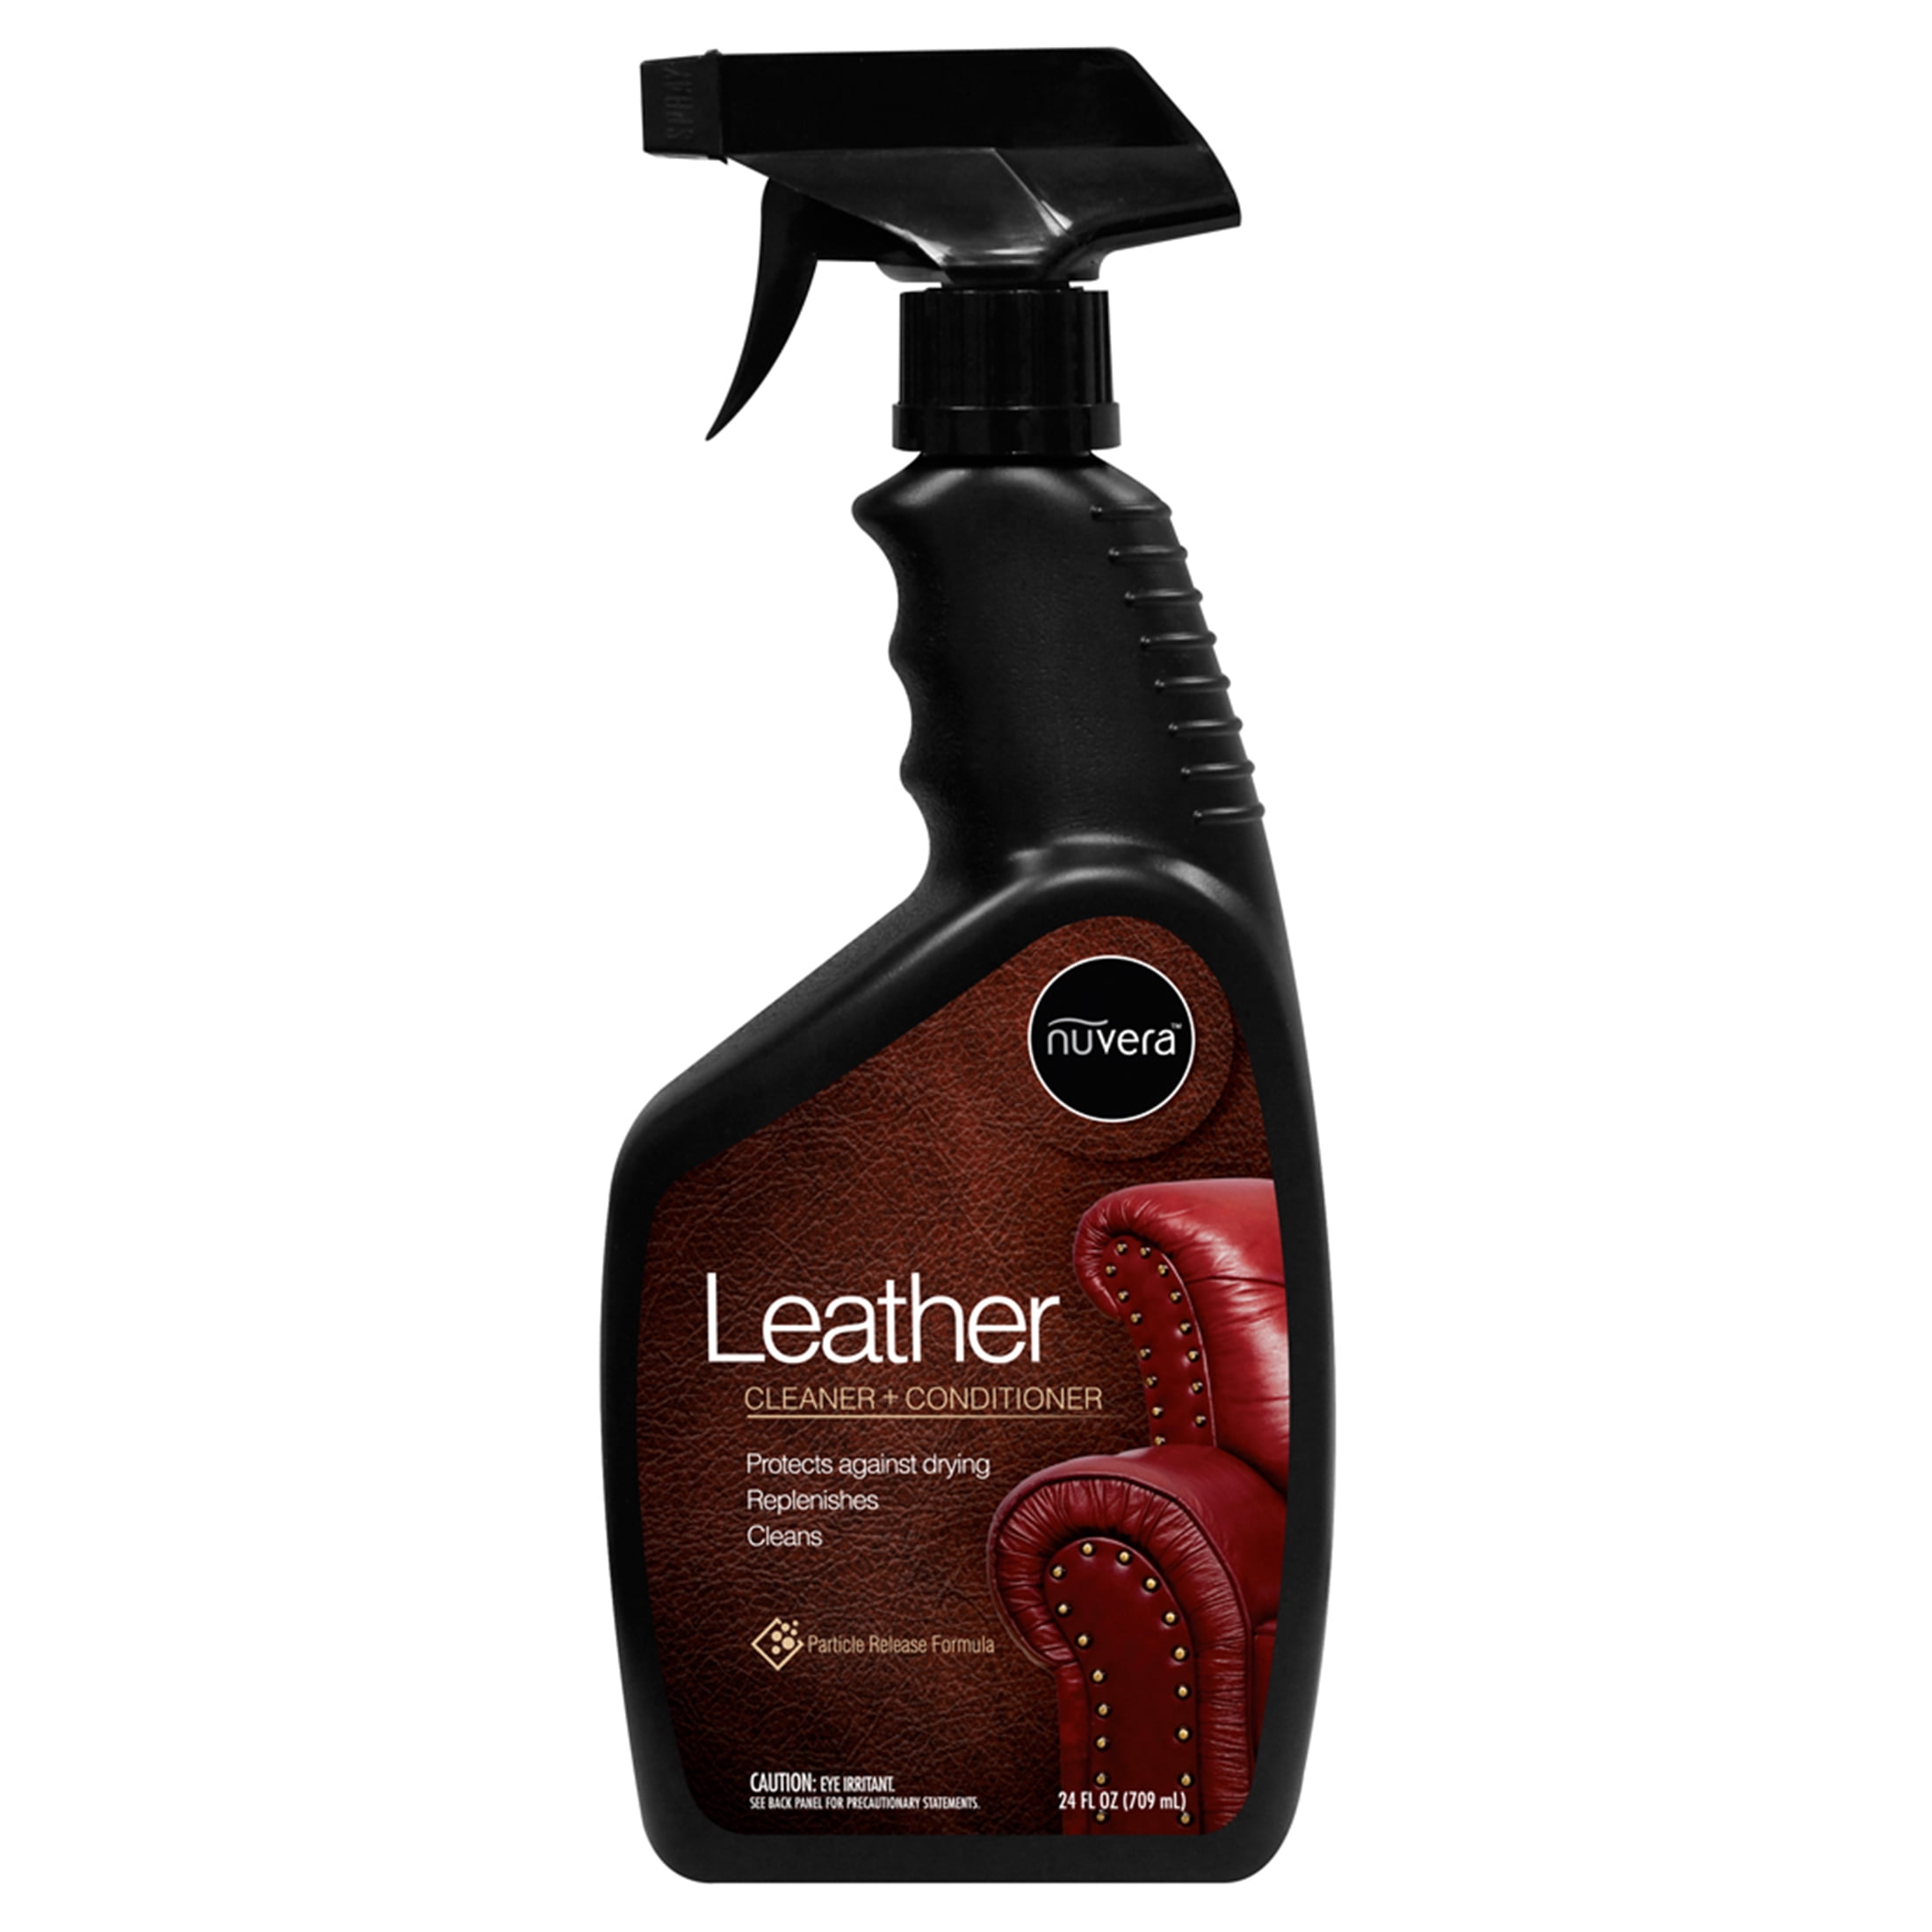 Cadillac Select Premium Leather Care Kit - Leather Cleaner, Lotion Conditioner